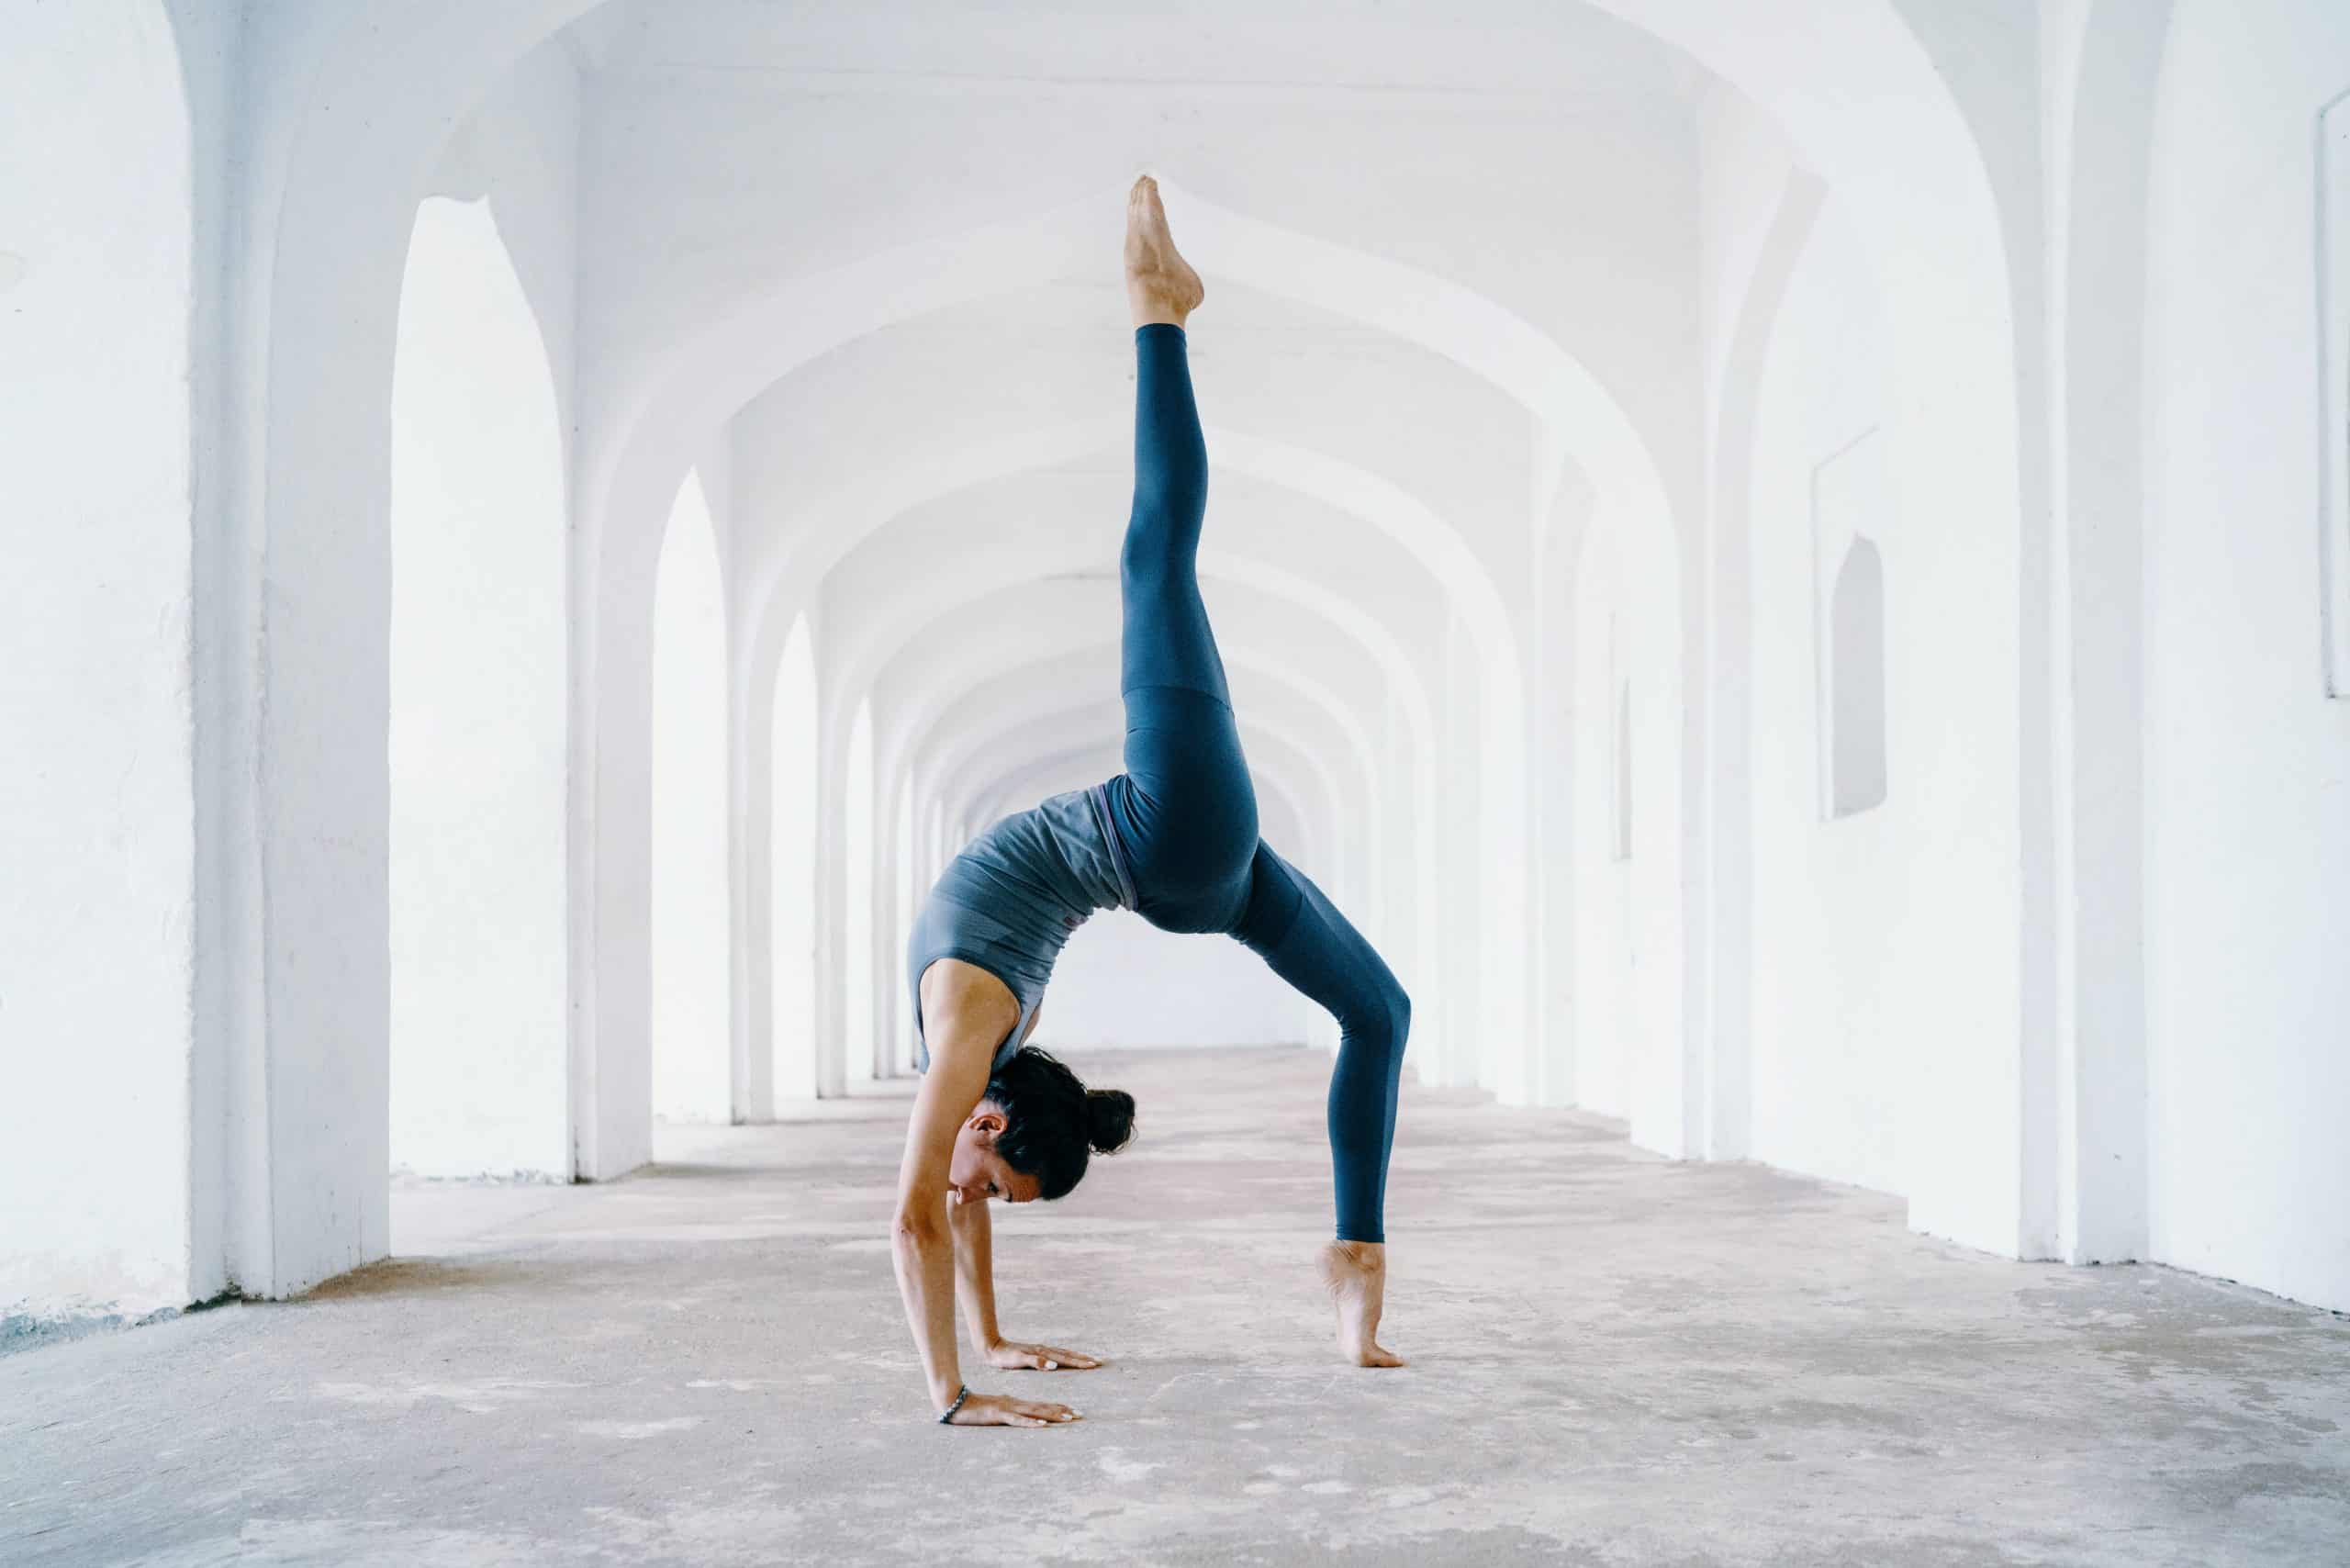 Sweat Tested: The Best Leggings For Yoga (And Hot Yoga)